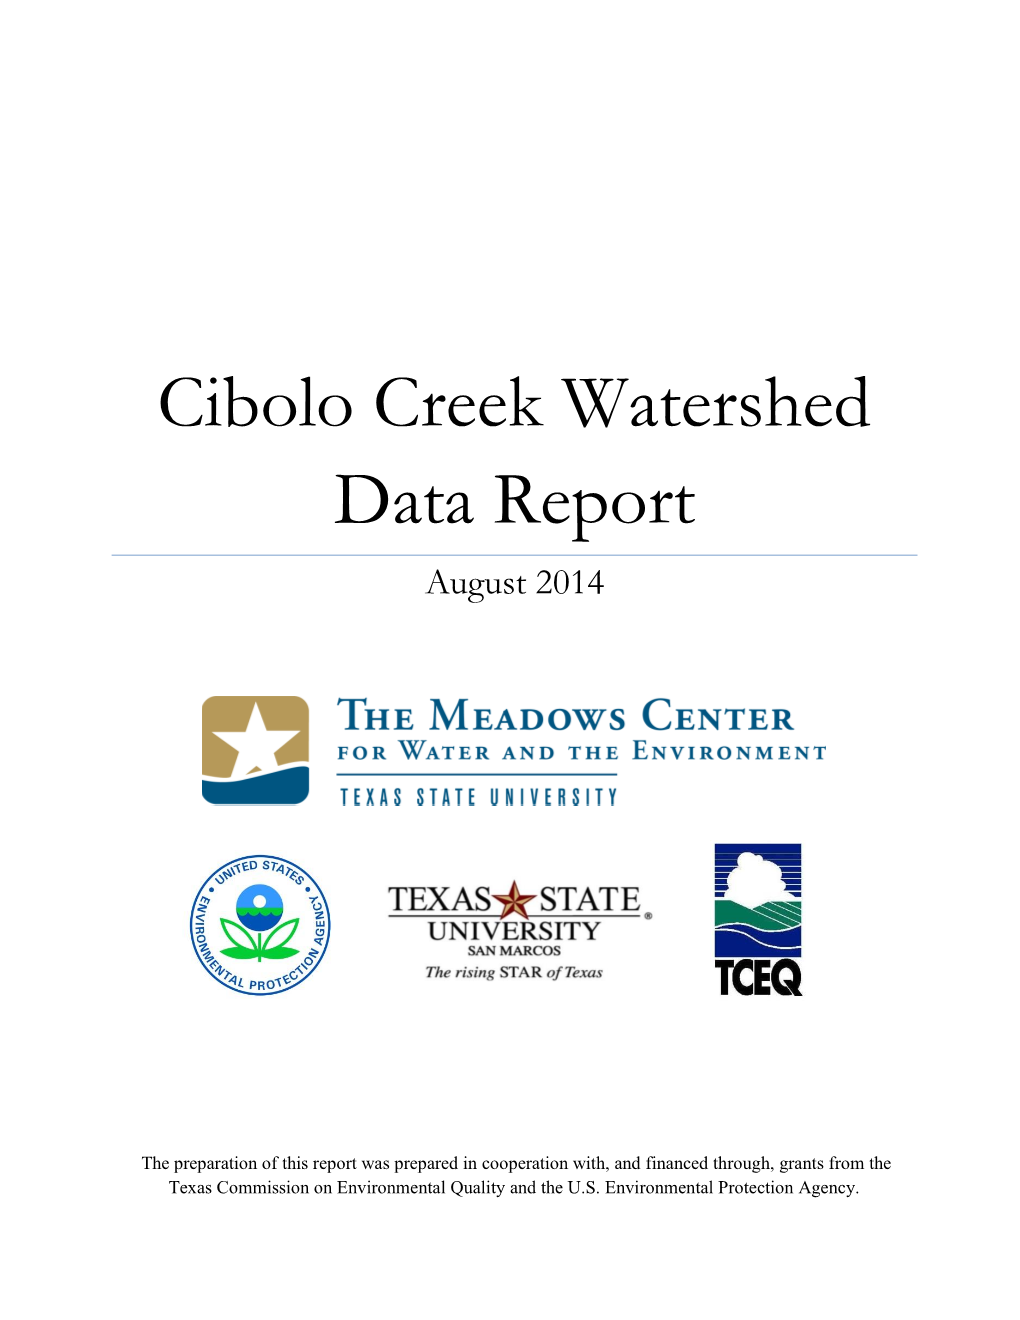 Cibolo Creek Watershed Data Report August 2014